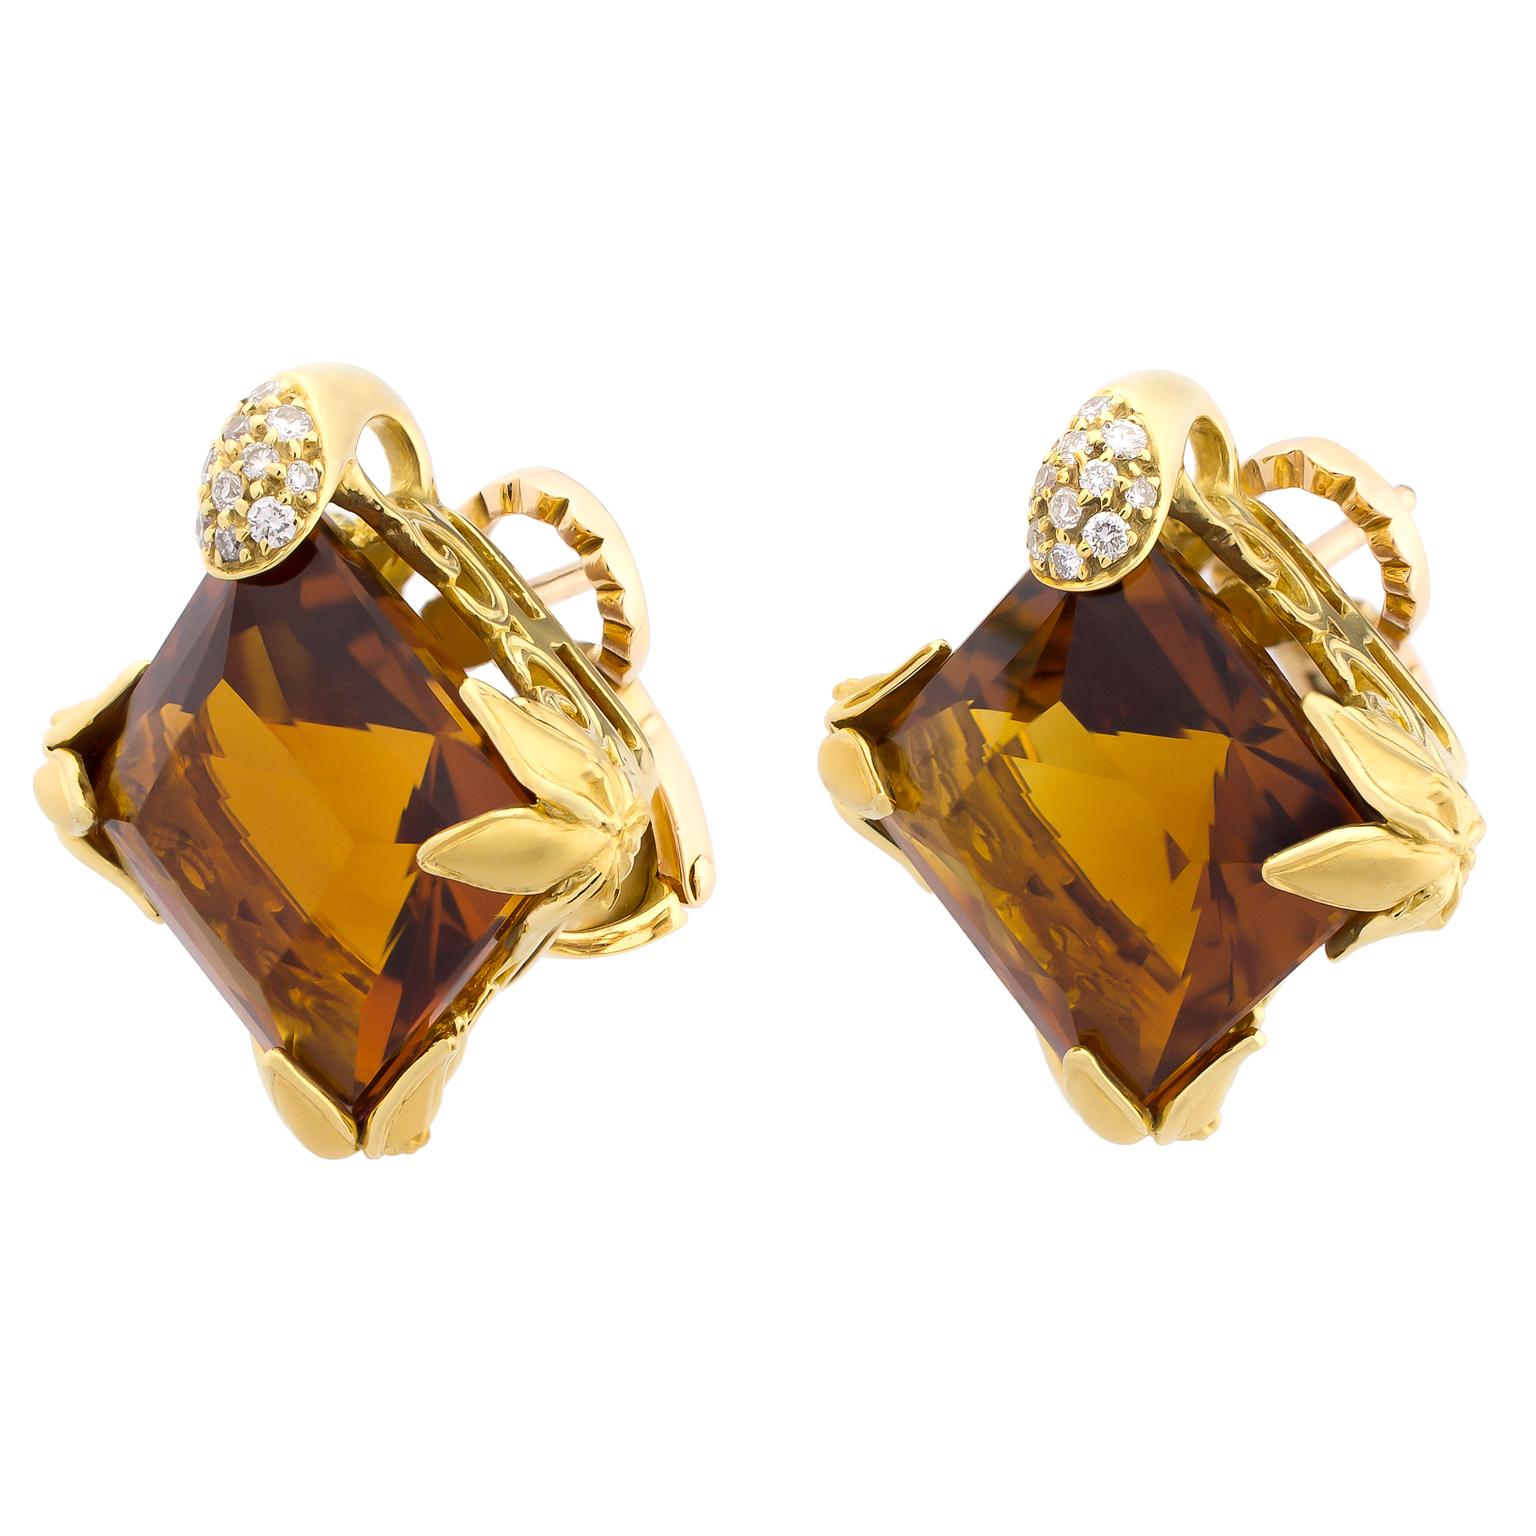 Carrera y Carrera earrings in yellow gold centered by 2 princess cut citrine quartzes, decorated with 24 round brilliant cut diamonds totallinig 0.35 carats.